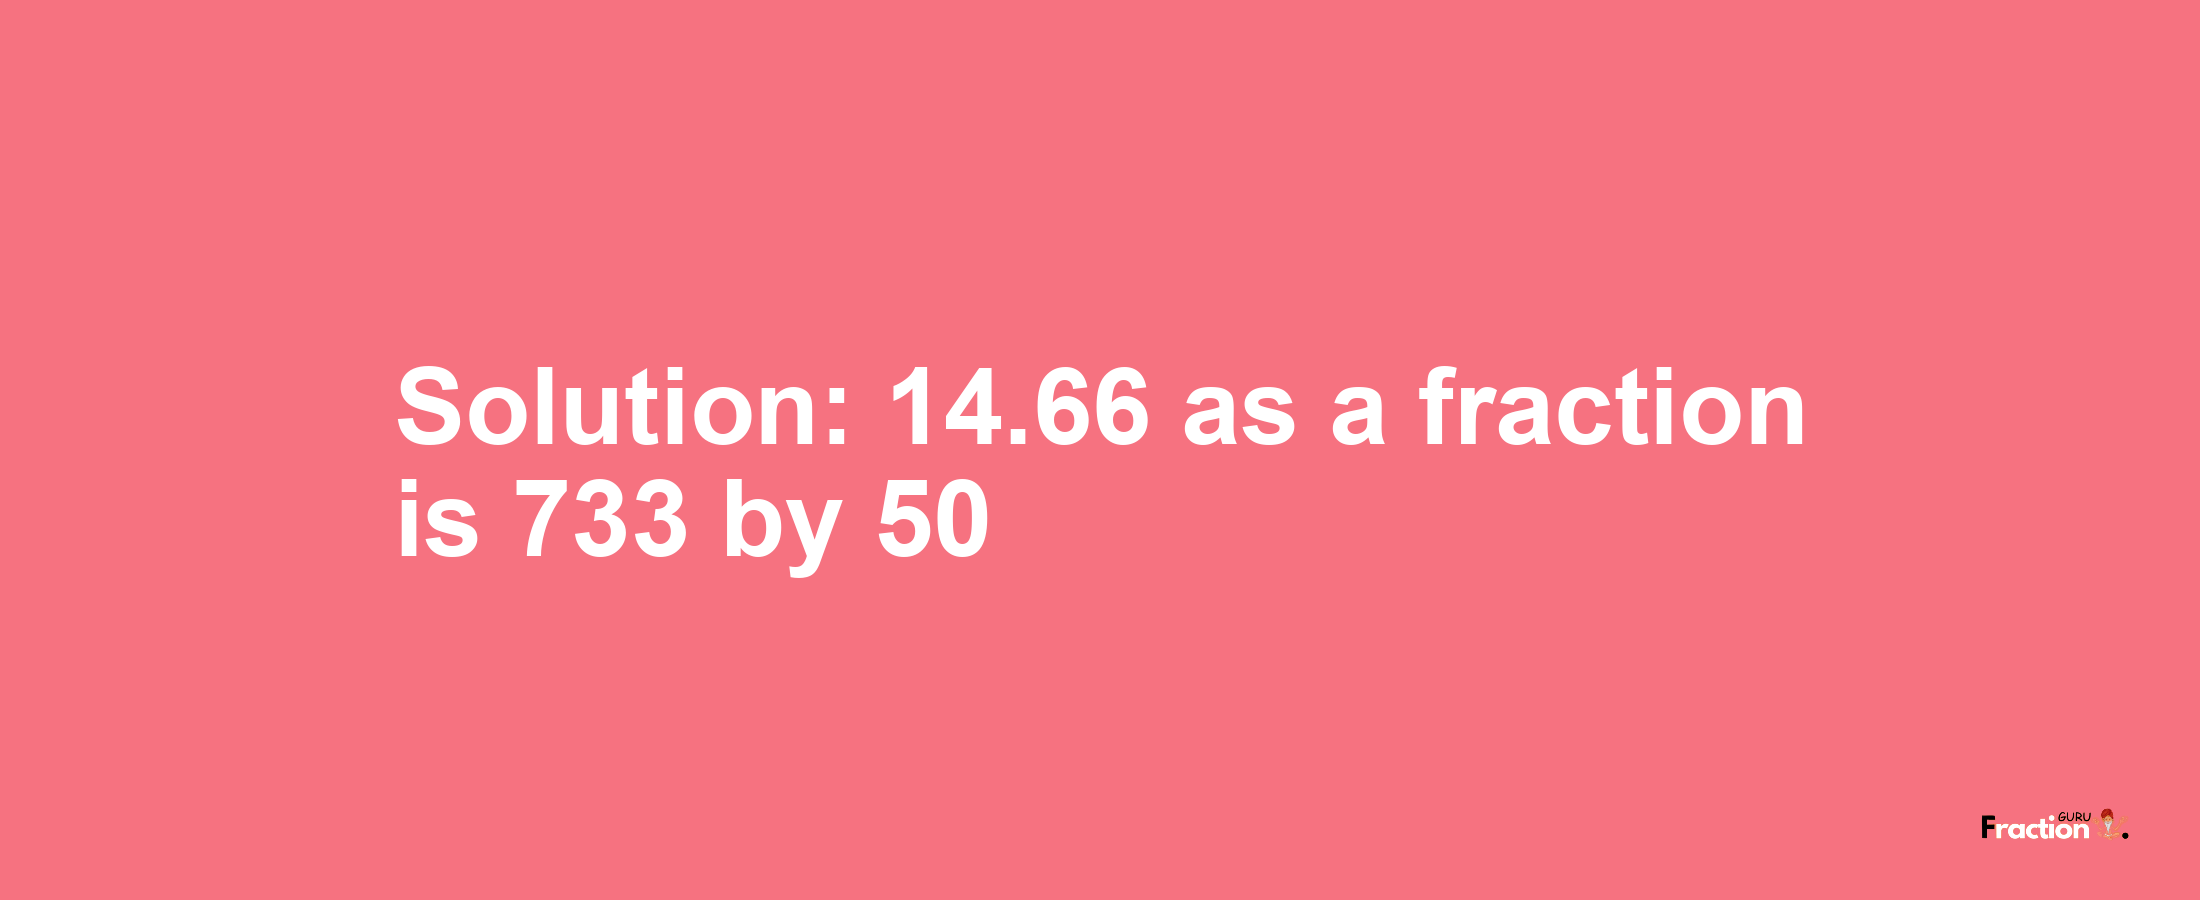 Solution:14.66 as a fraction is 733/50